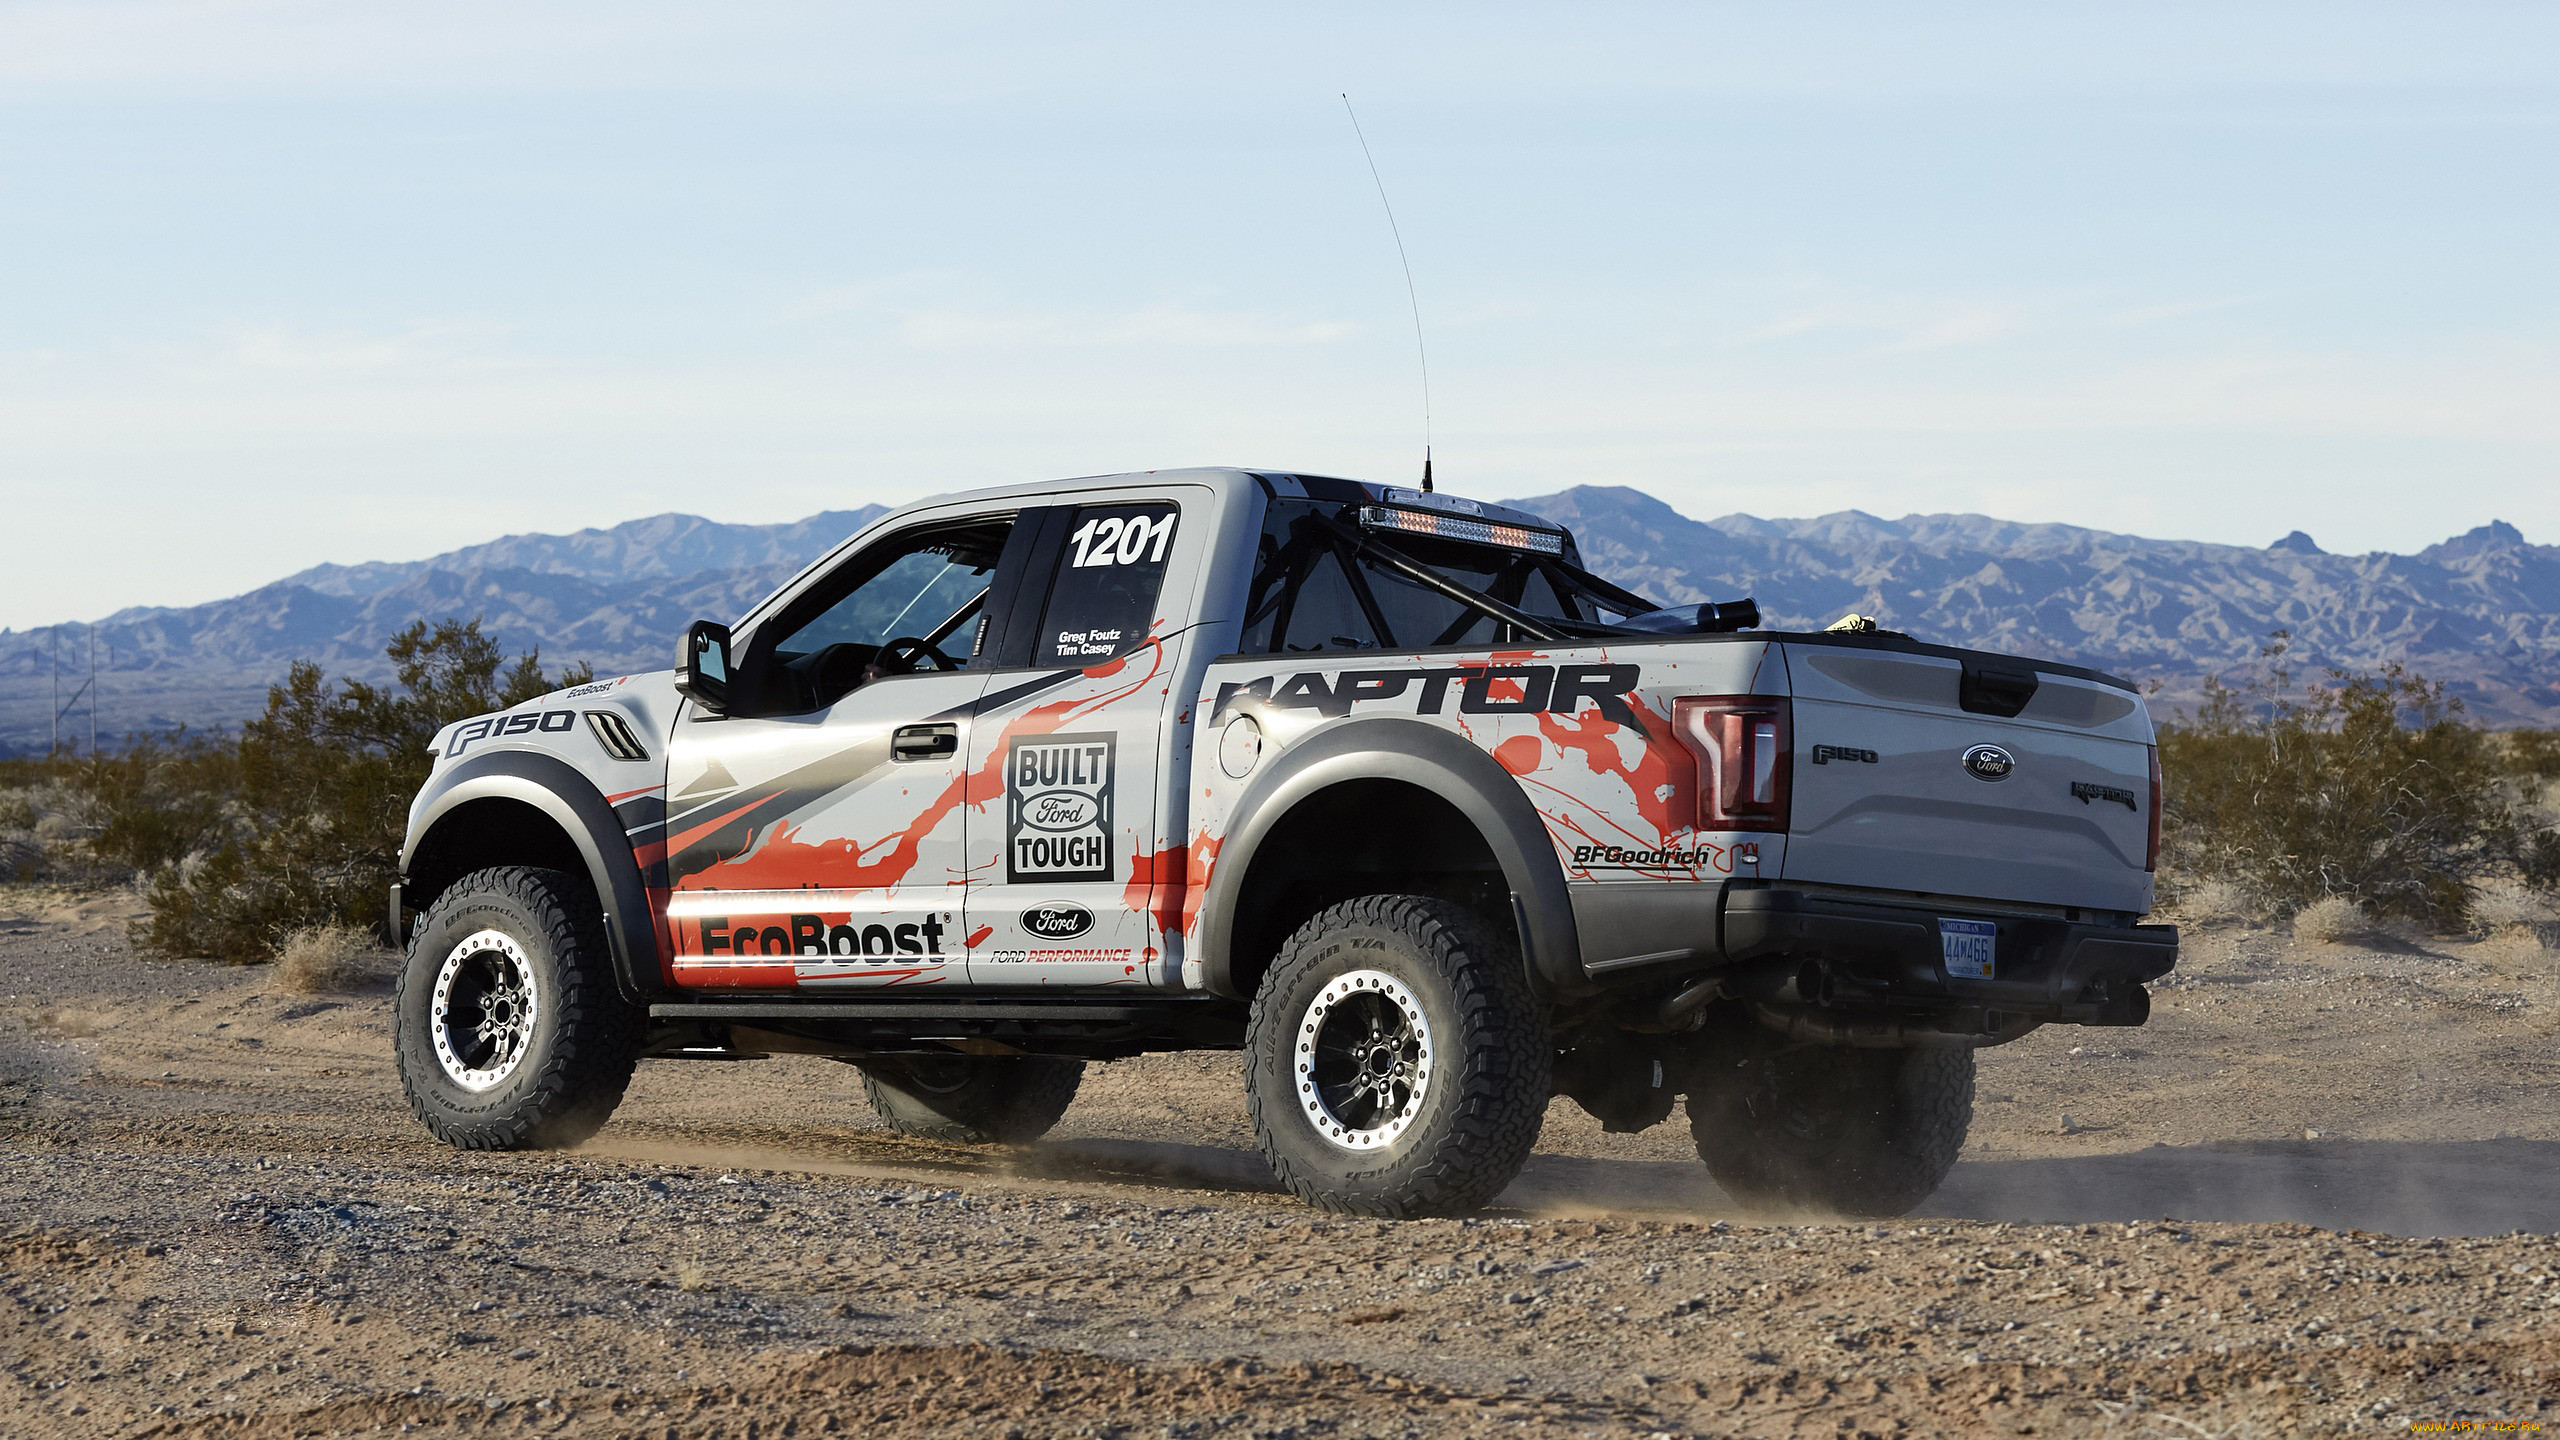 ford f-150 raptor race truck concept 2016, , ford, 2016, race, concept, truck, f-150, raptor